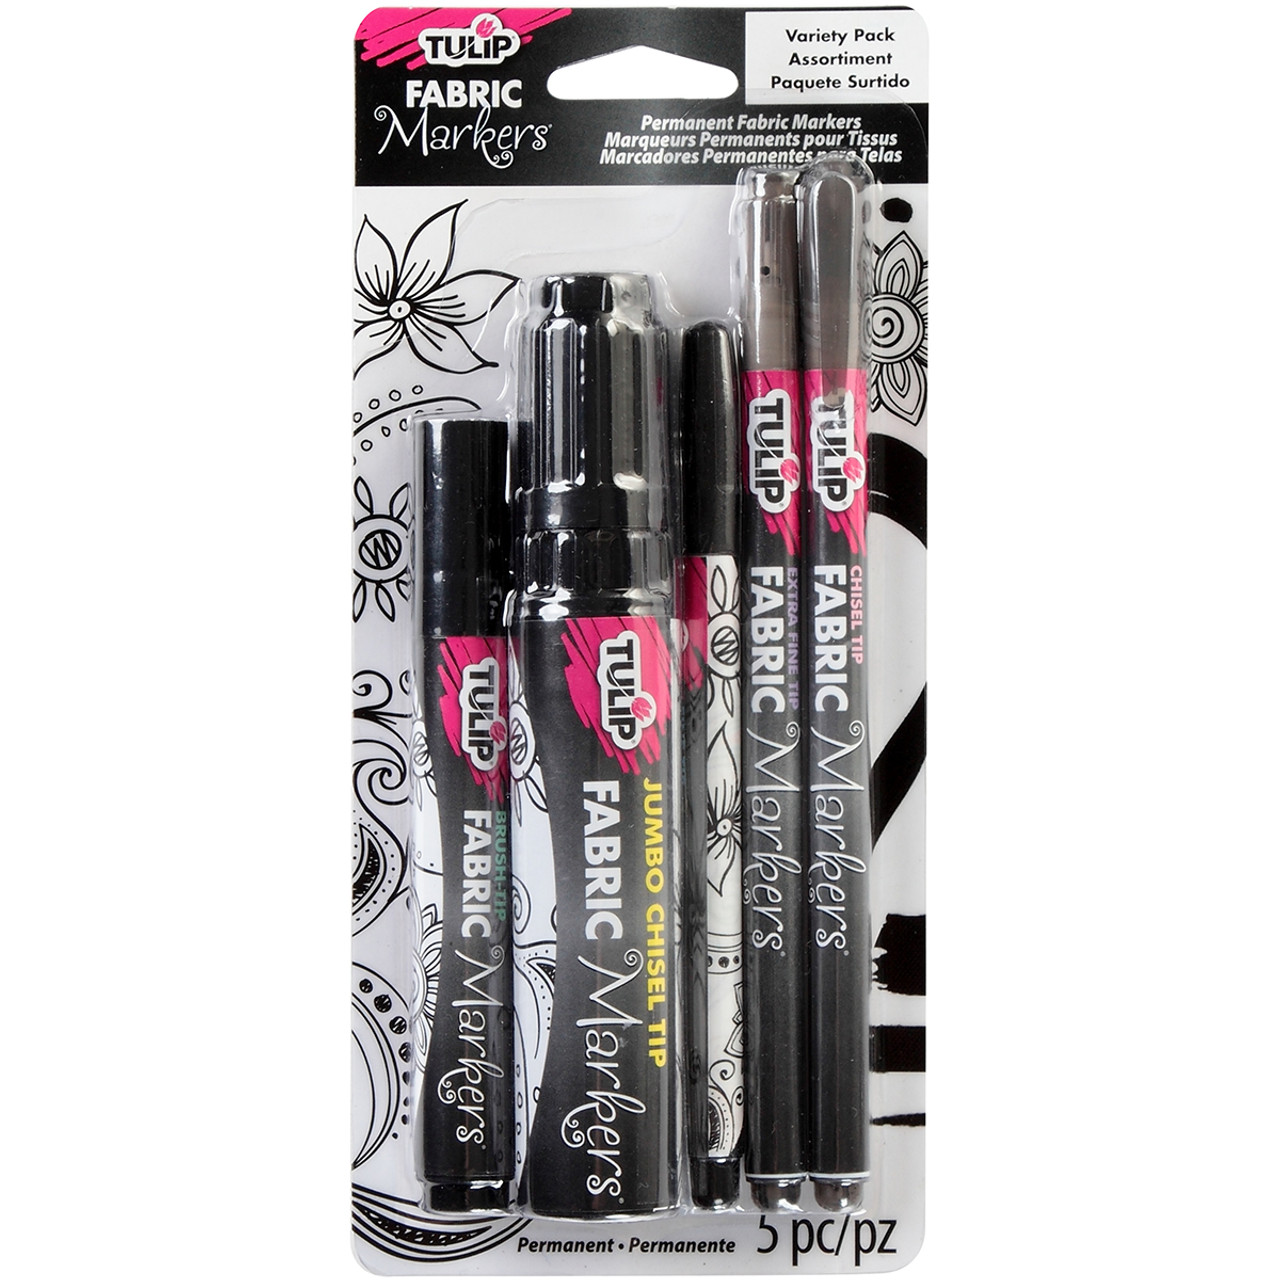 2 Pack Tulip Fabric Markers Variety Pack 5/Pkg-Black Assorted Tips FM5 -  GettyCrafts